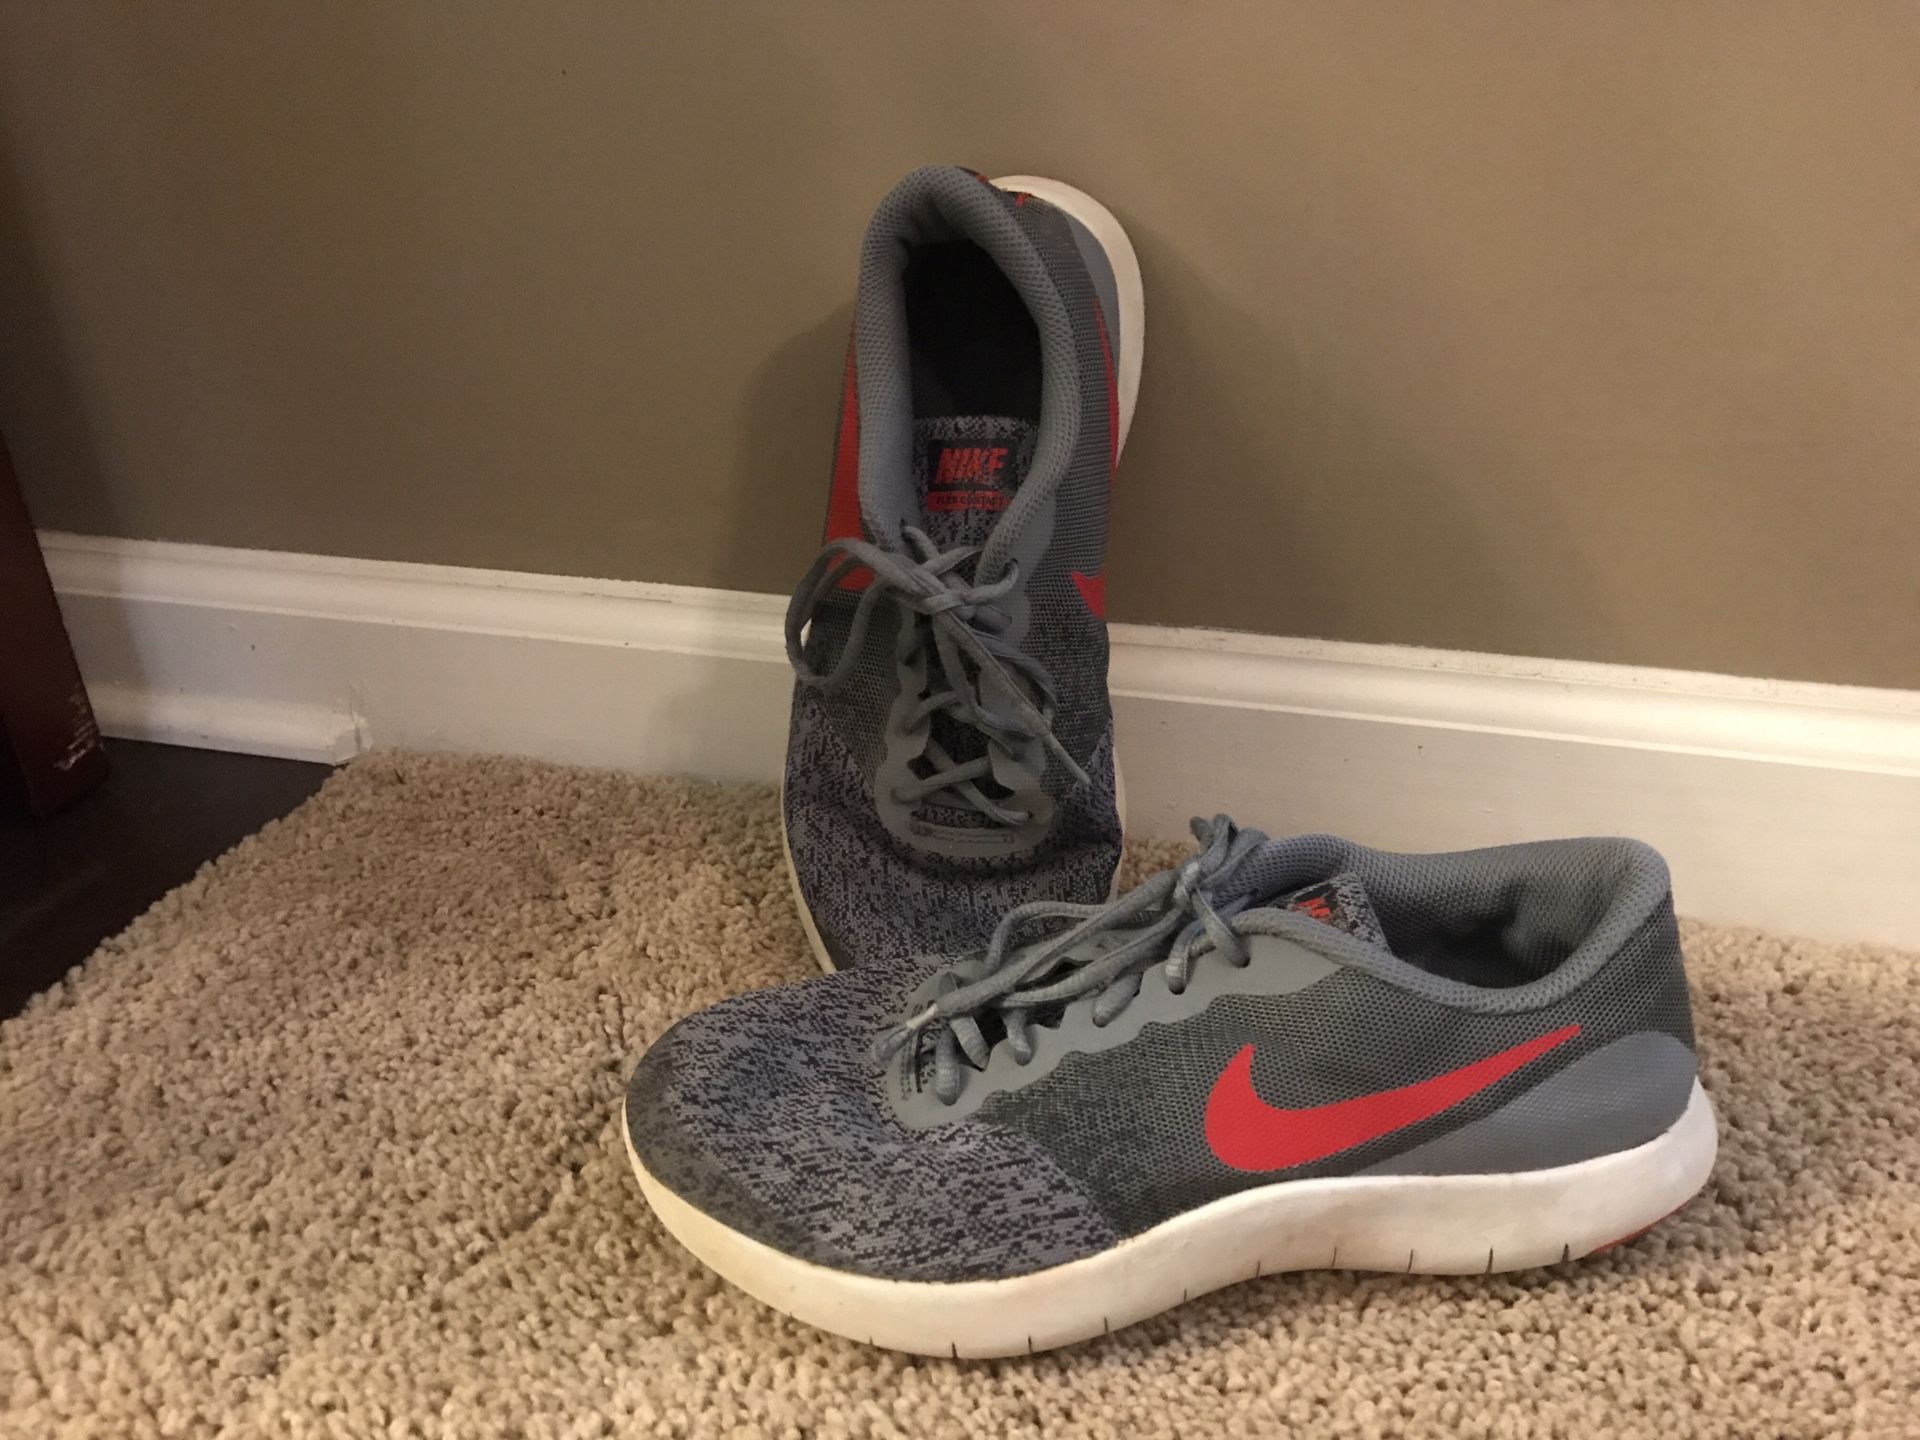 Boys Nike & Labron shoes (3 pair total)